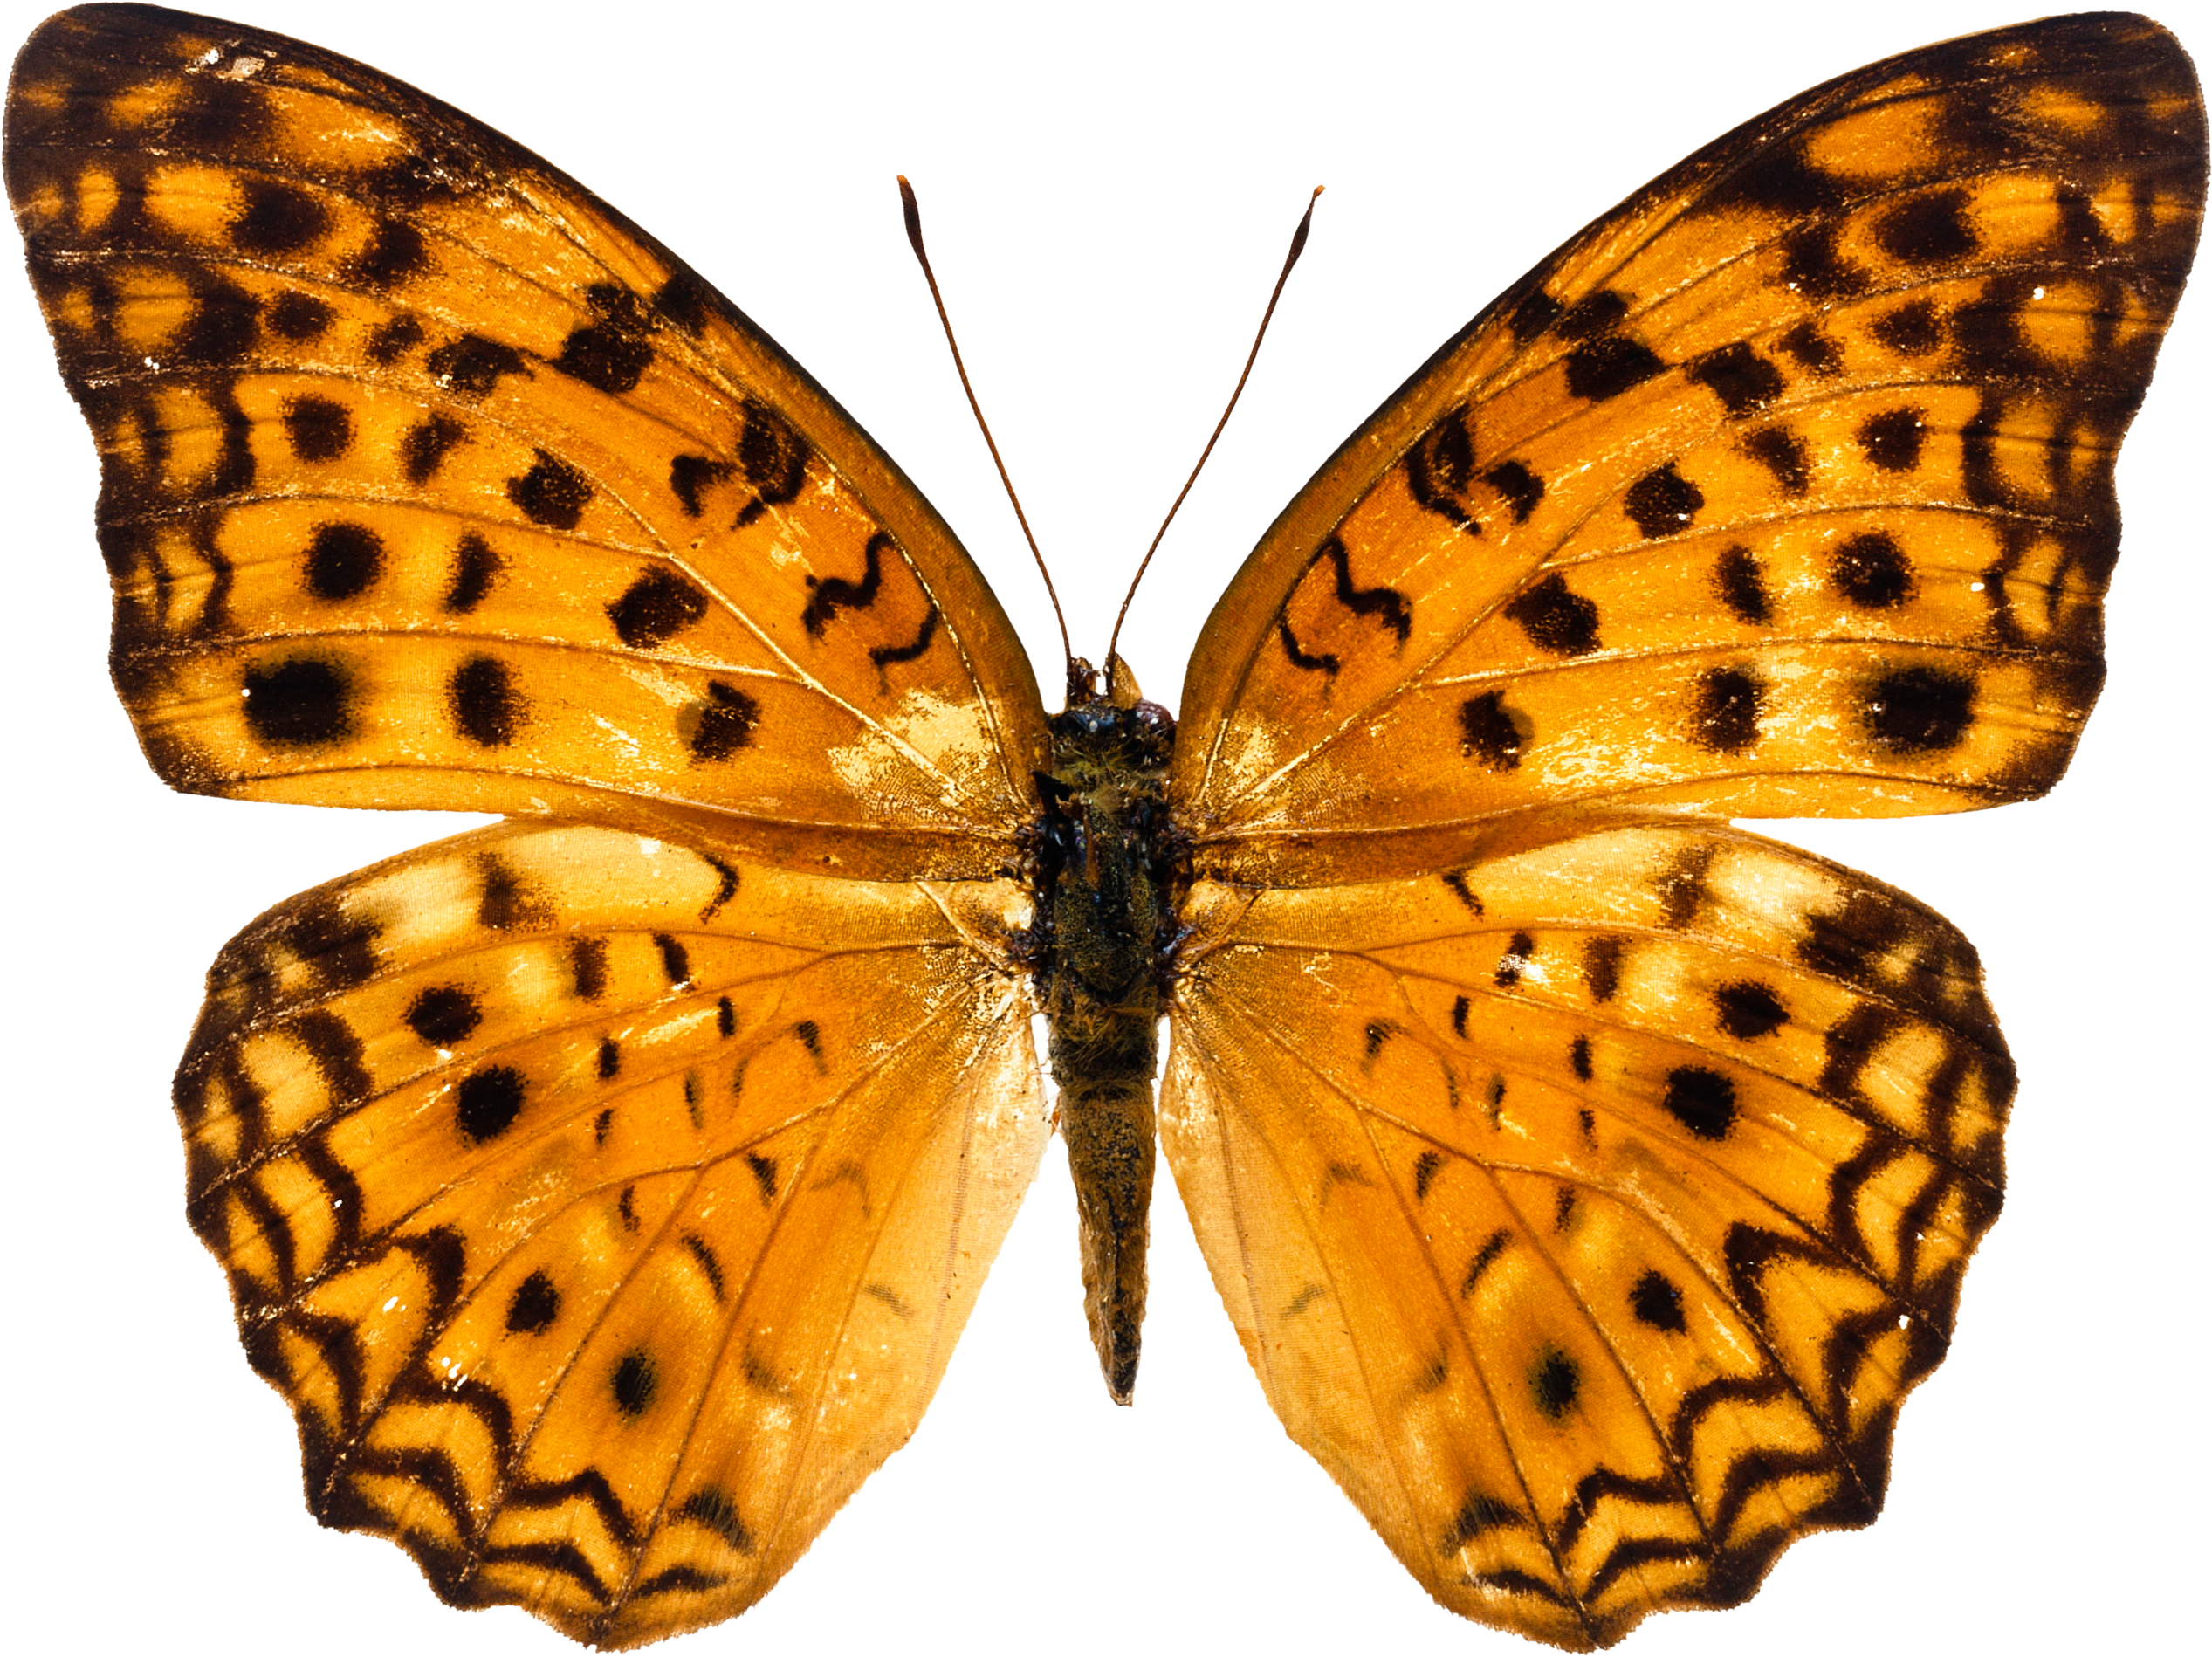 Orange Butterfly Png Image, Butterflies Free Download - Butterflies Download, Transparent background PNG HD thumbnail